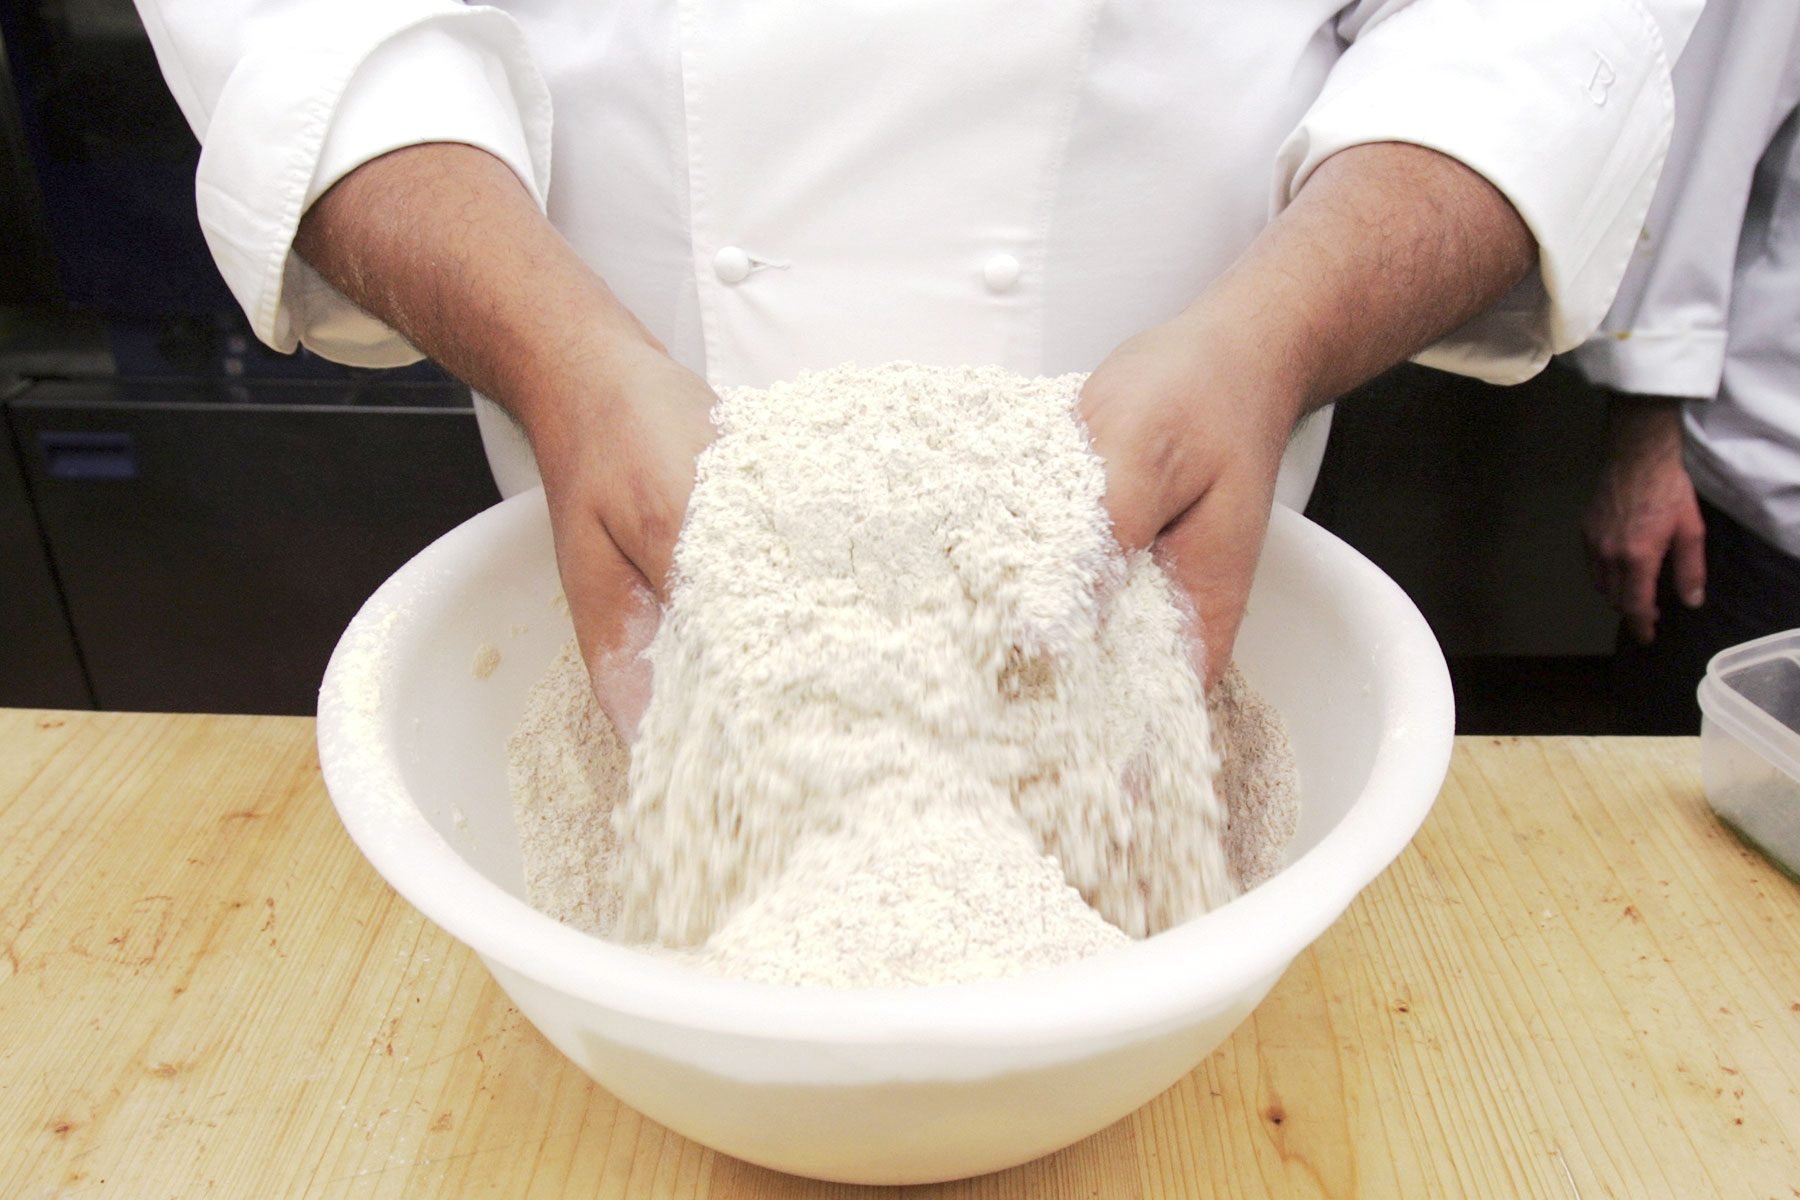 Italian Chef tosses flour in a mixing bowl while teaching a technical course on local cuisine